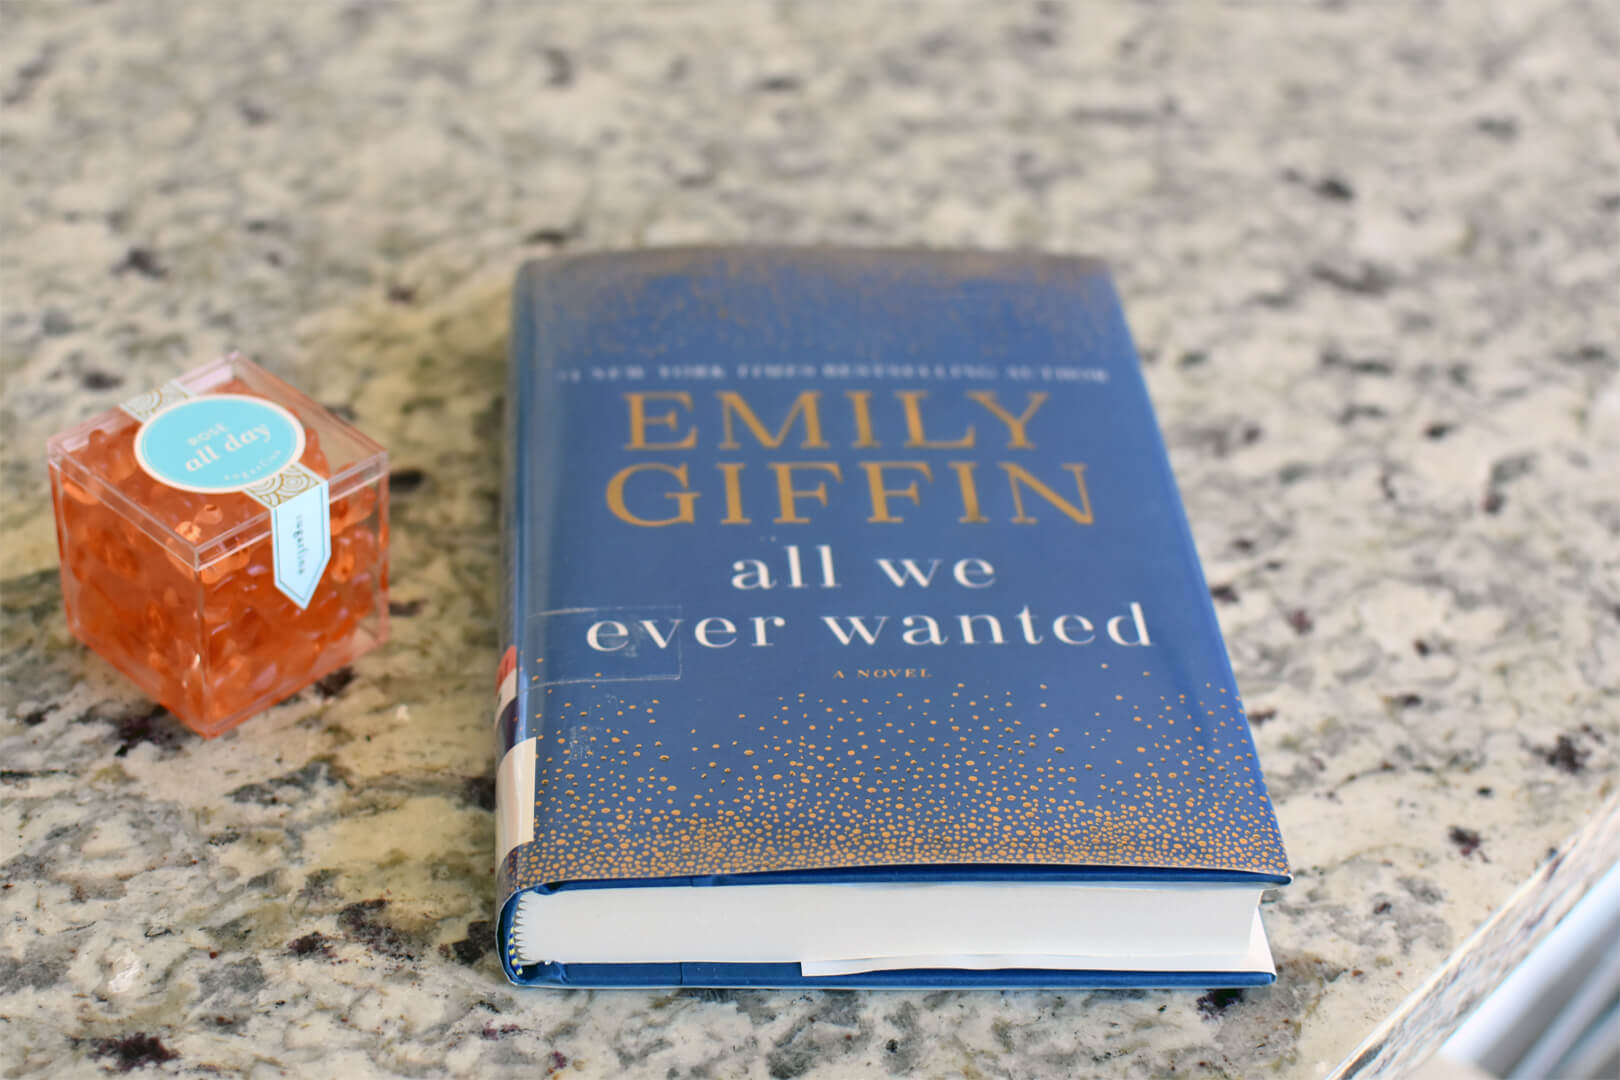 Preview: All We Ever Wanted by Emily Giffin